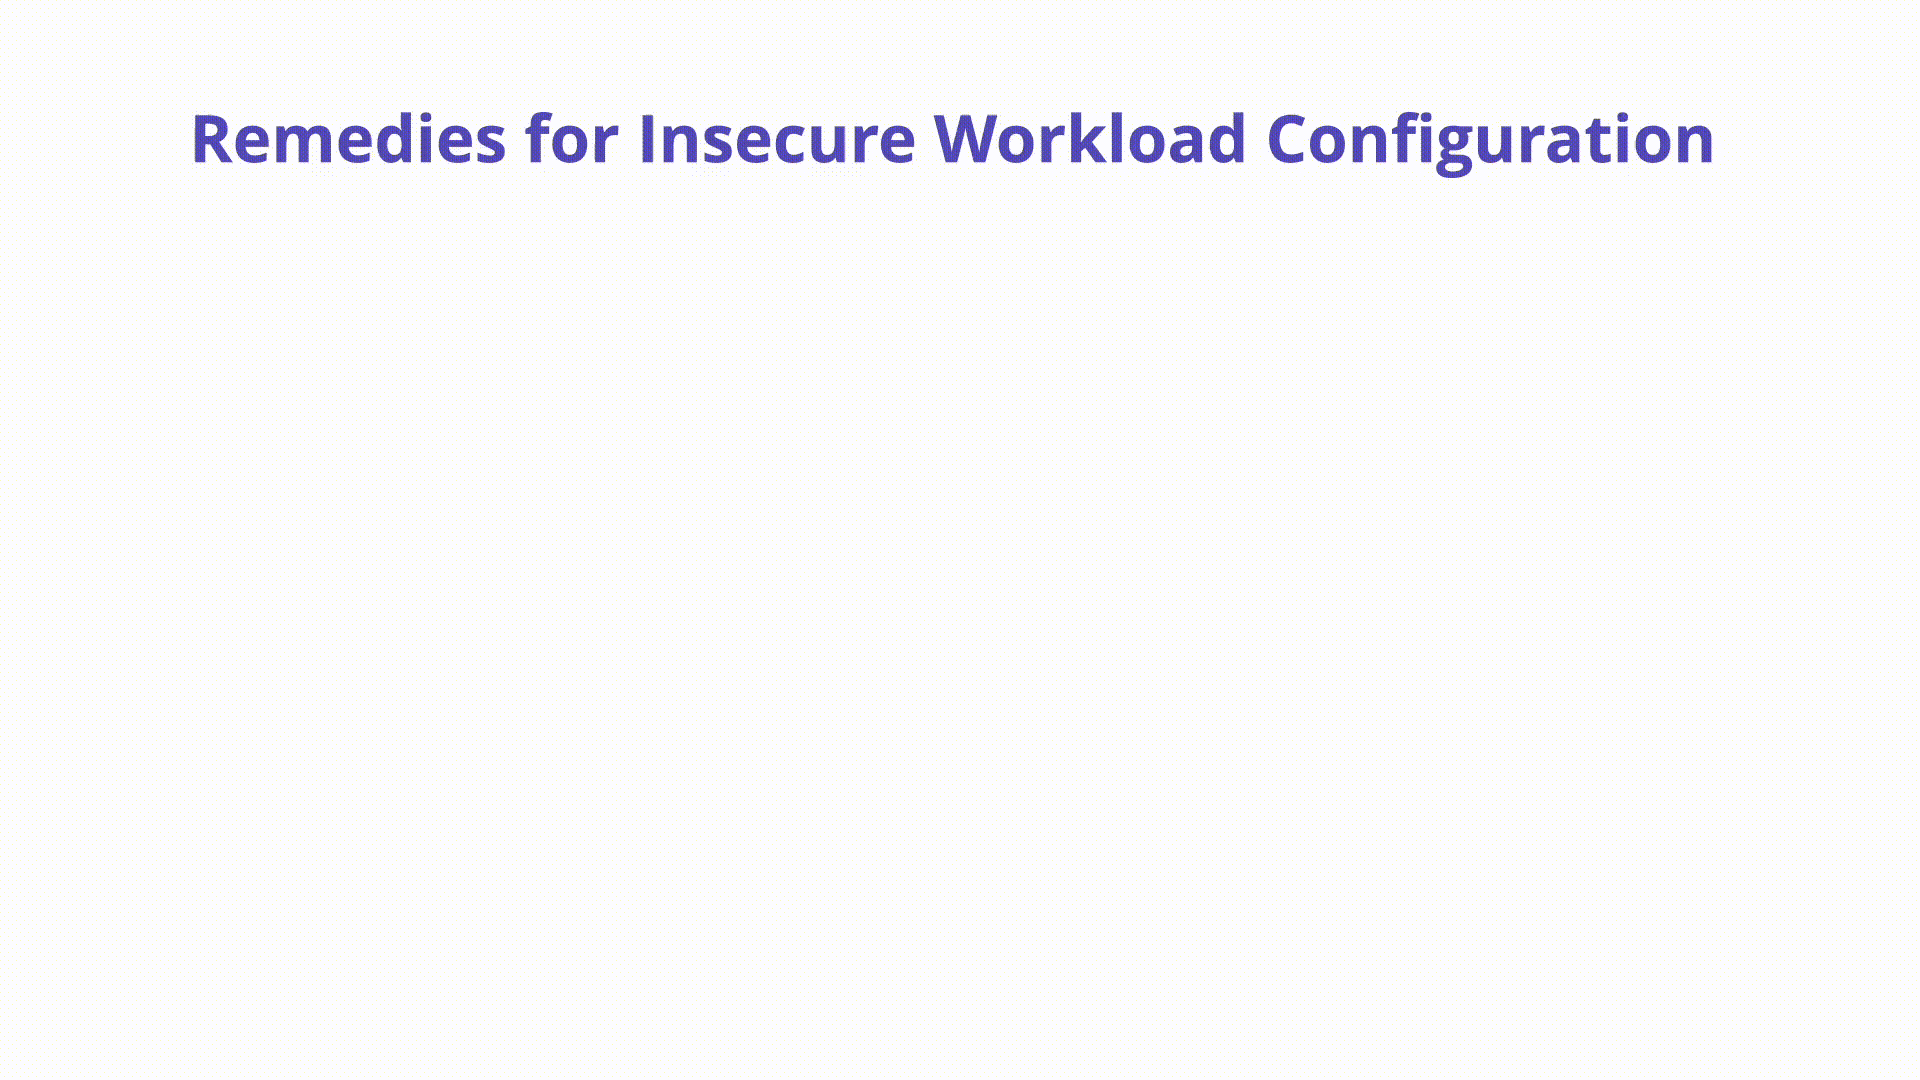 Insecure Workload Configuration -
Mitigations